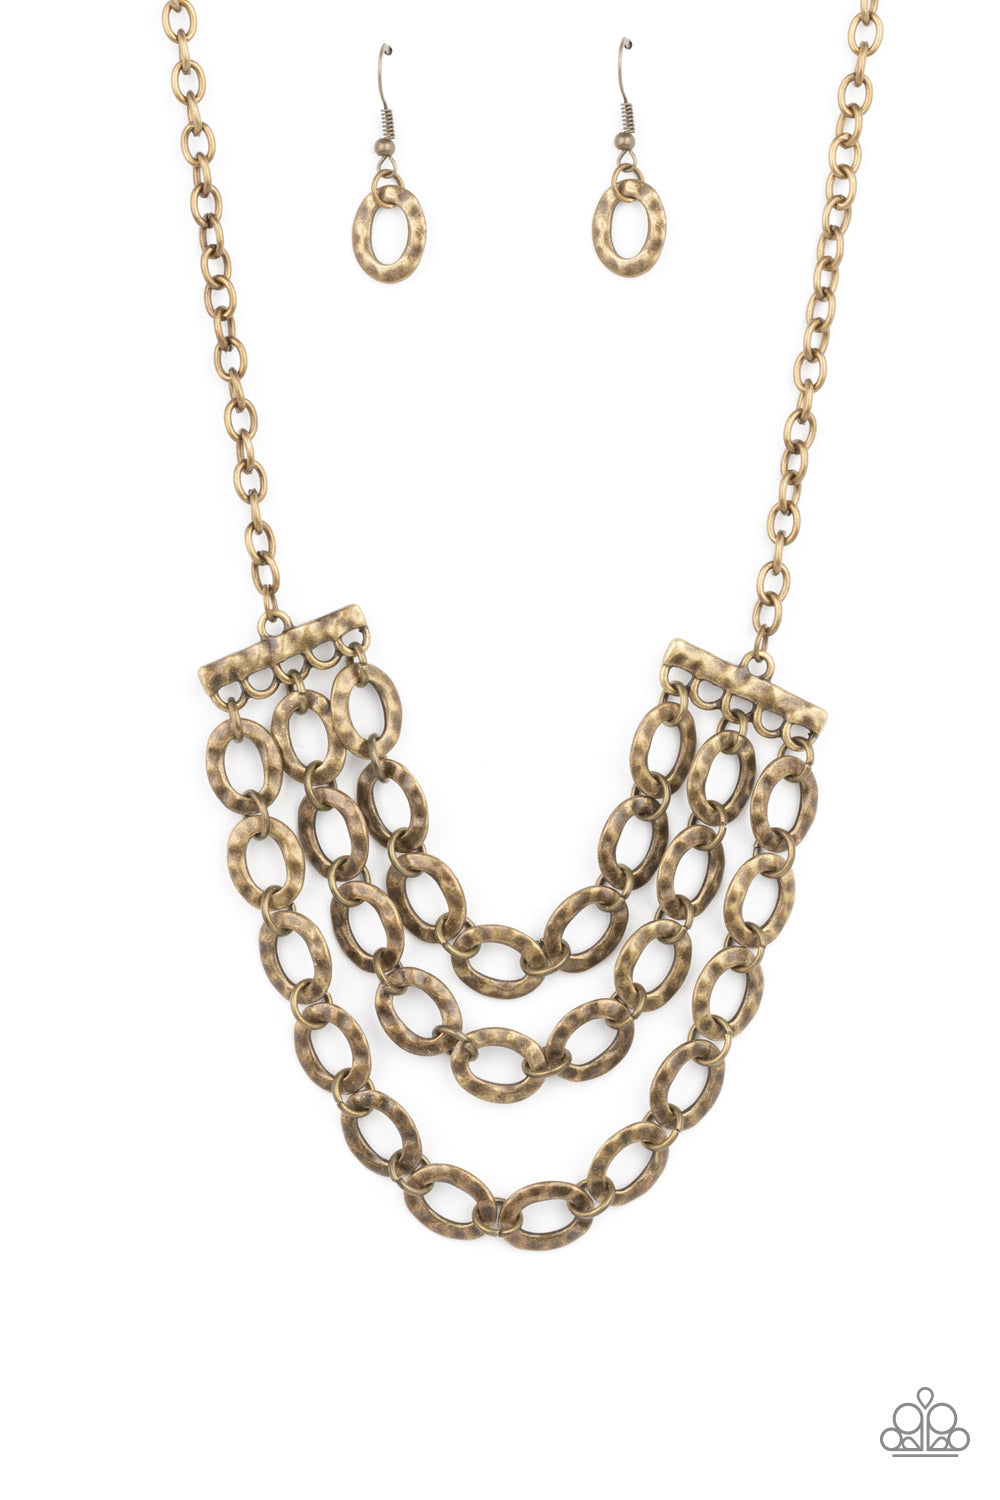 Repeat After Me - Brass ***COMING SOON*** - Bling With Crystal